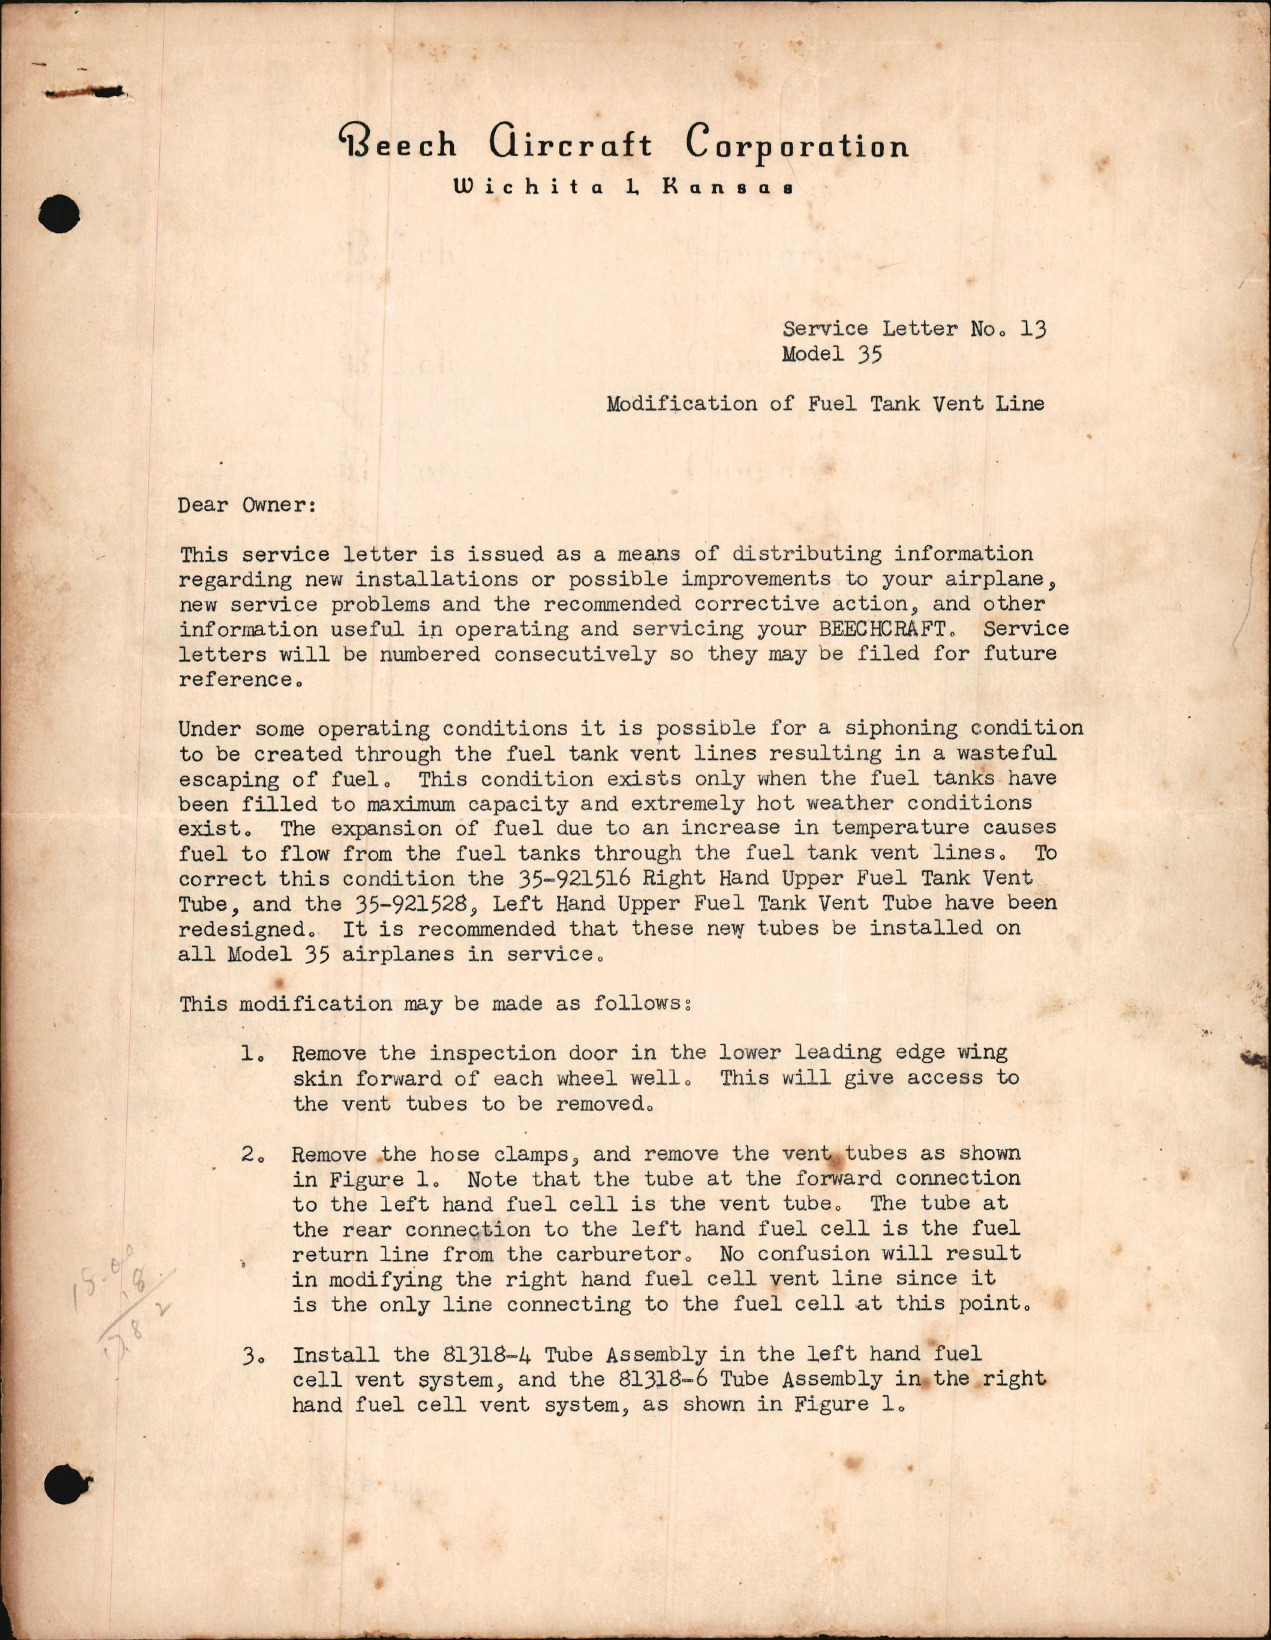 Sample page 1 from AirCorps Library document: Modification of Fuel Tank Vent Line